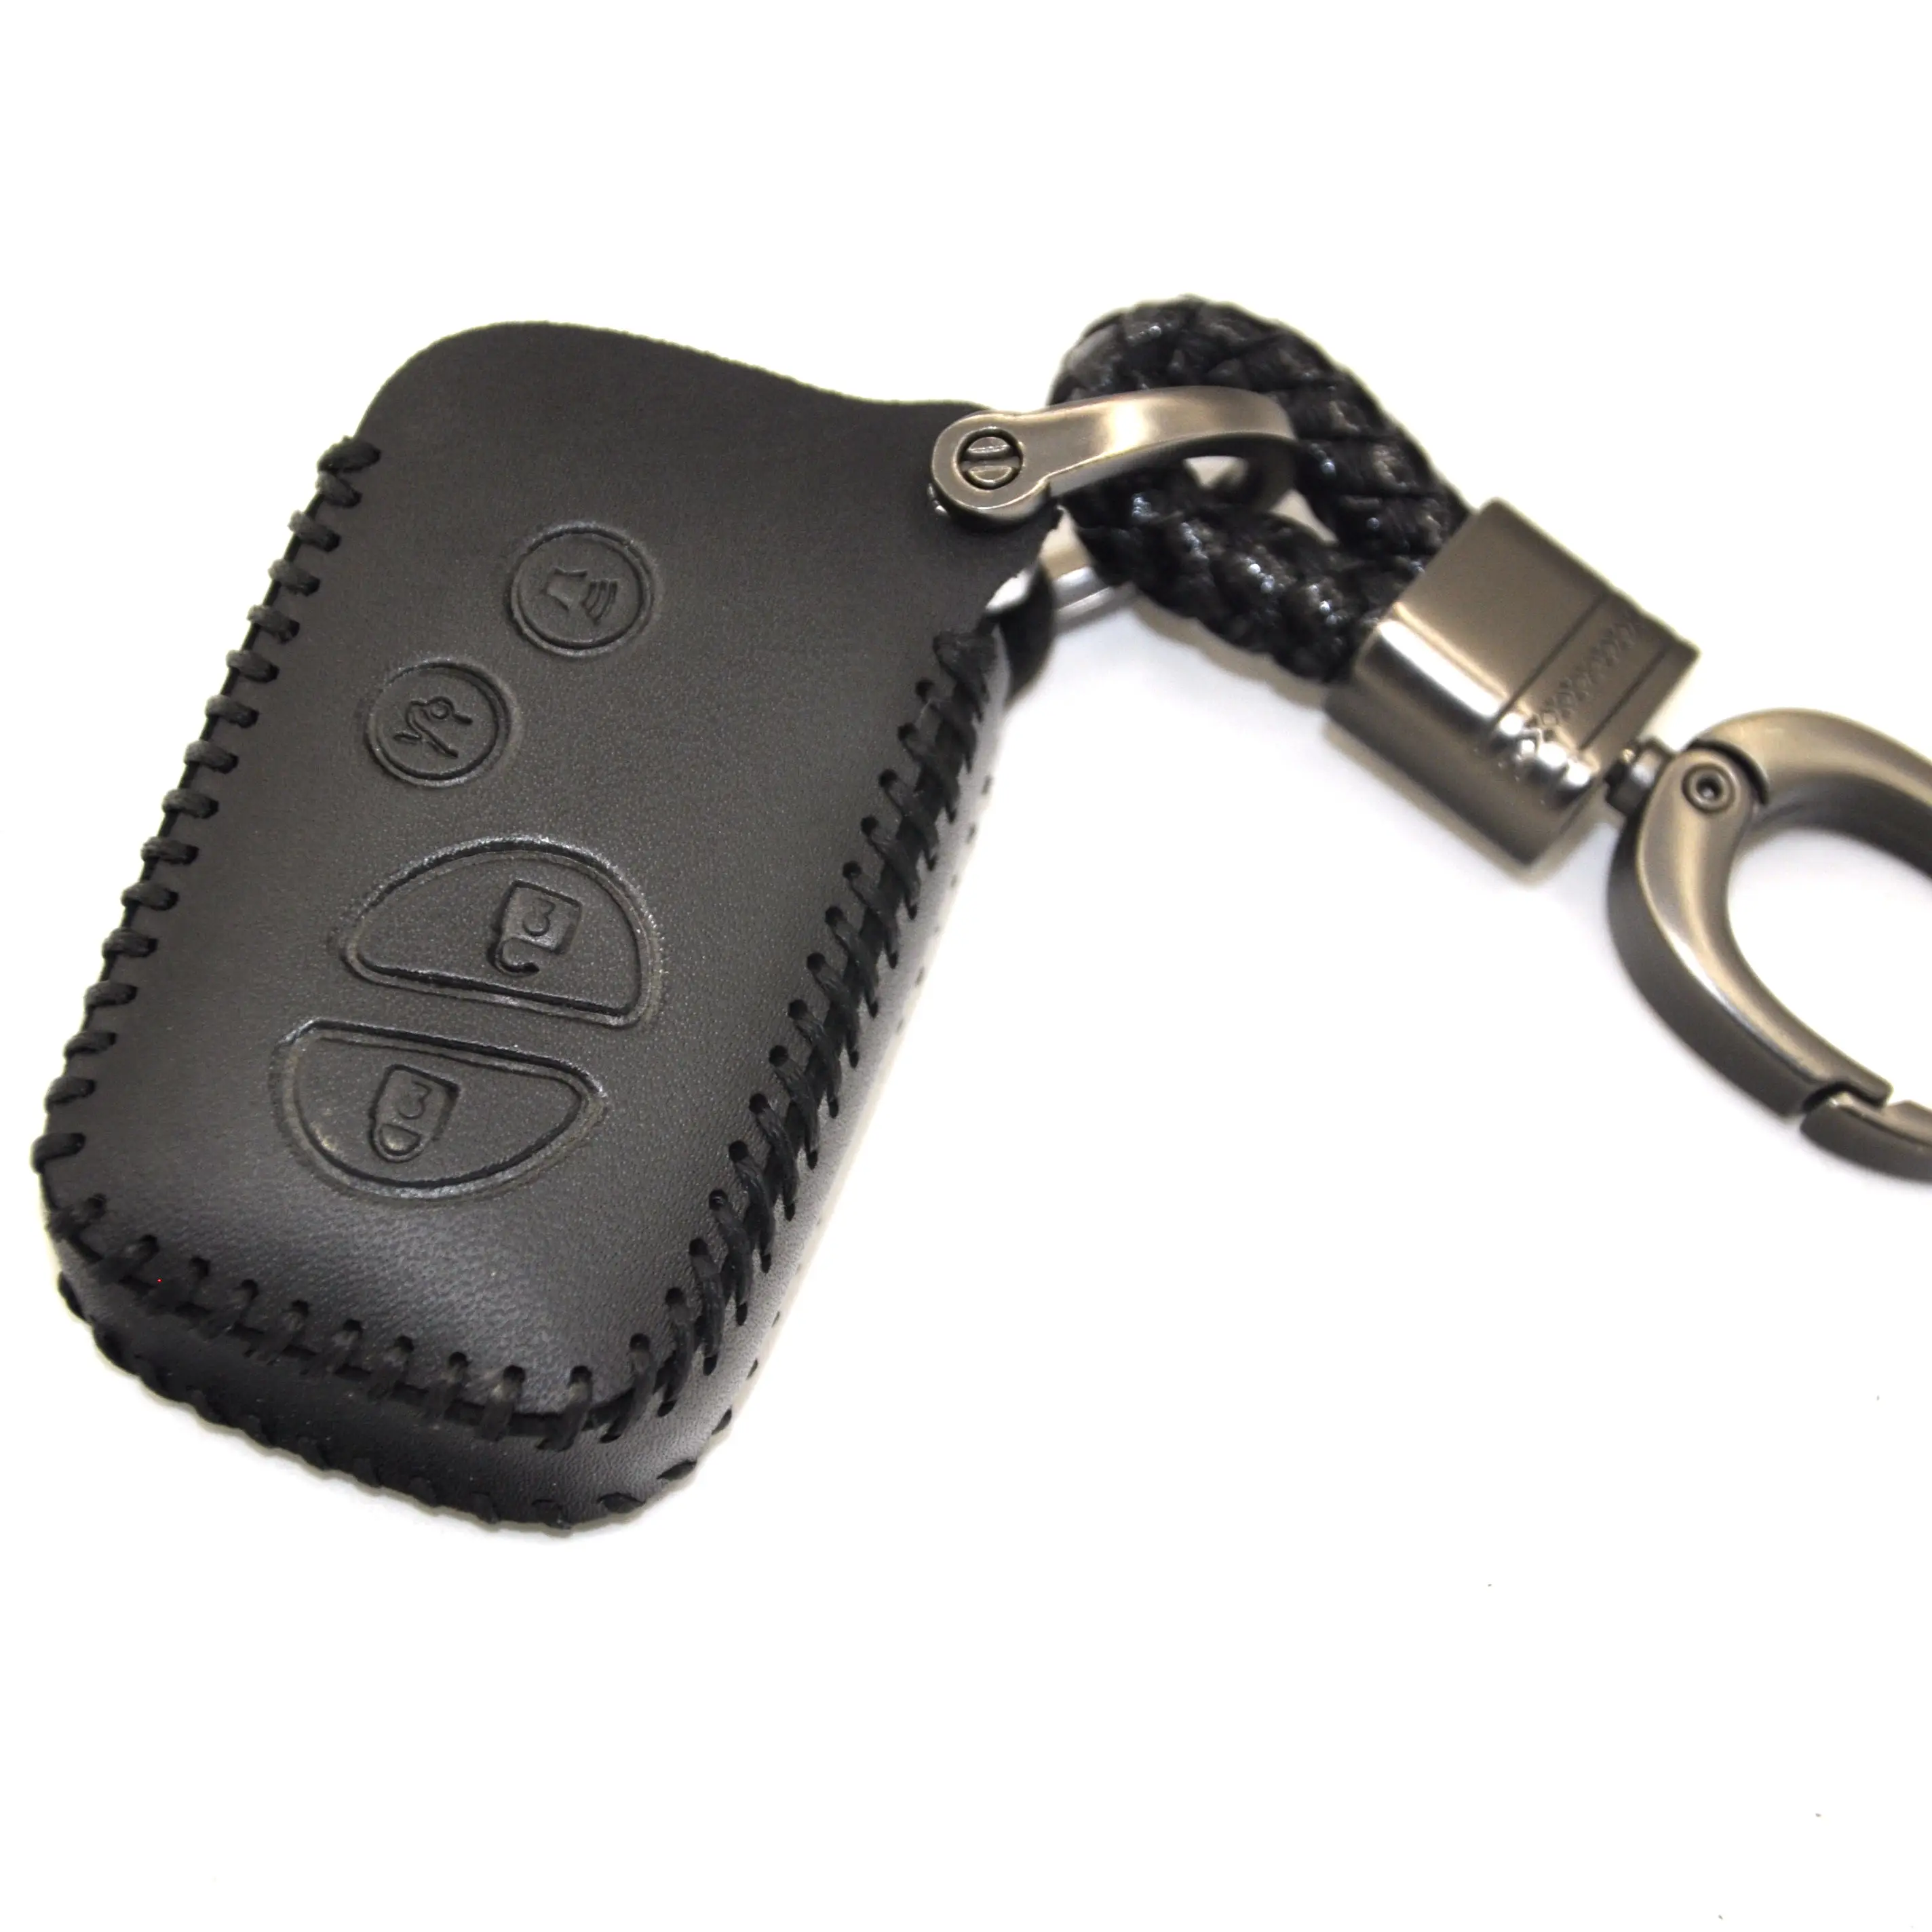 

New Leather for Lexus Smart Key ES 300h 250 350 IS GS CT200h RX CT200 ES240 GX400 LX570 RX270 Car Cover Case Keychain Shell, Black